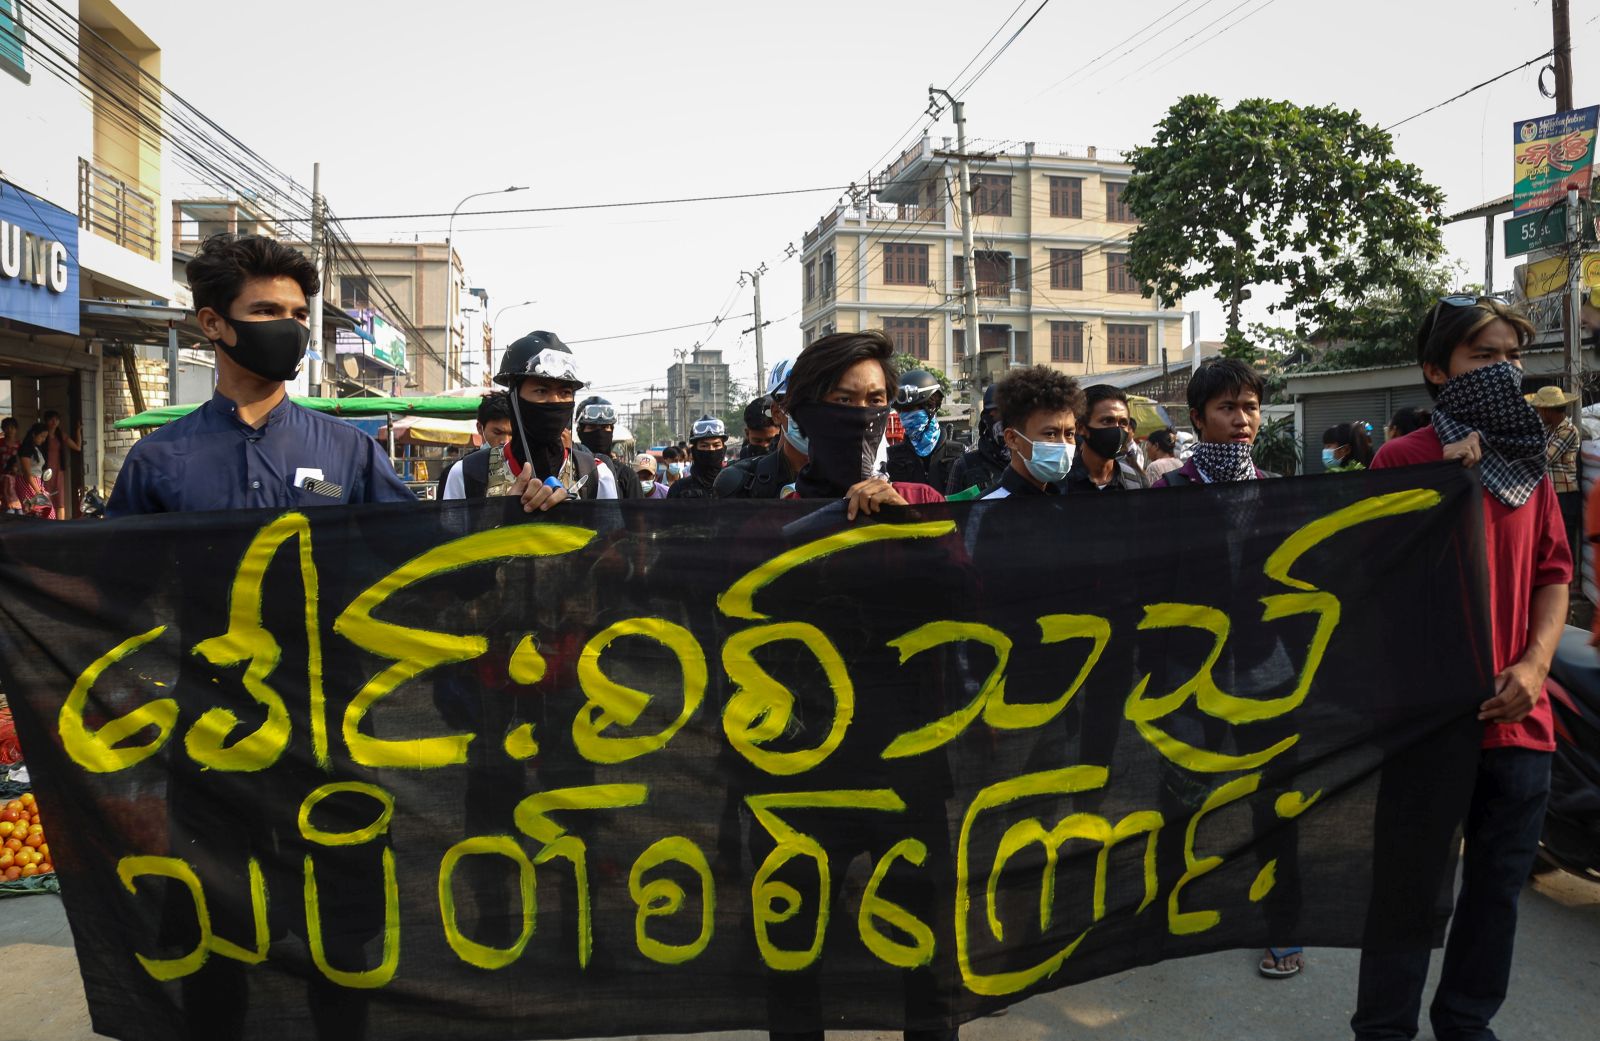 epa09084864 Demonstrators march carrying a banner that says 'Peackock Soldiers Strike' during a protest against the military coup in Mandalay, Myanmar, 20 March 2021. Anti-coup protests continued despite the intensifying violent crackdowns on demonstrators by security forces.  EPA/STRINGER